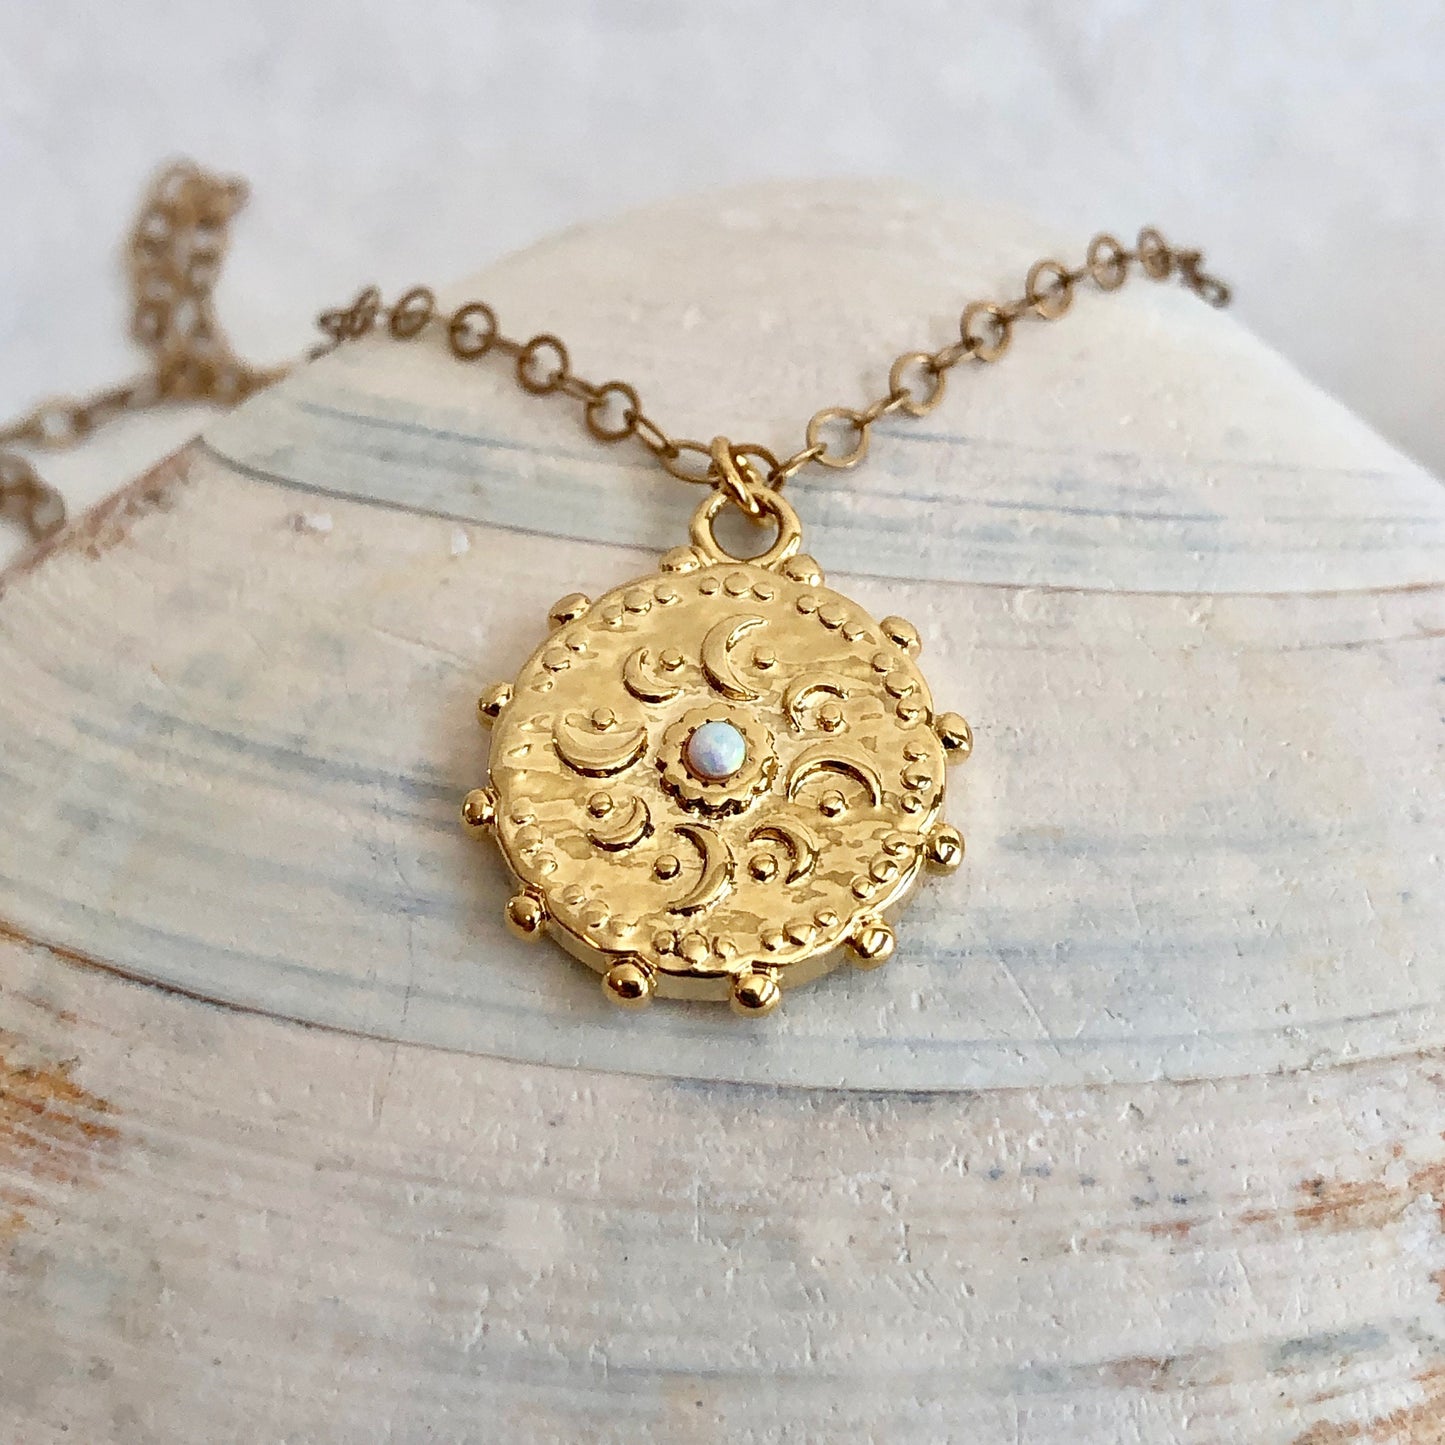 Gorgeous gold coin celestial pendant with sweet opal drop in the center. Beautiful graduation gift. 14 karat gold filled chain.